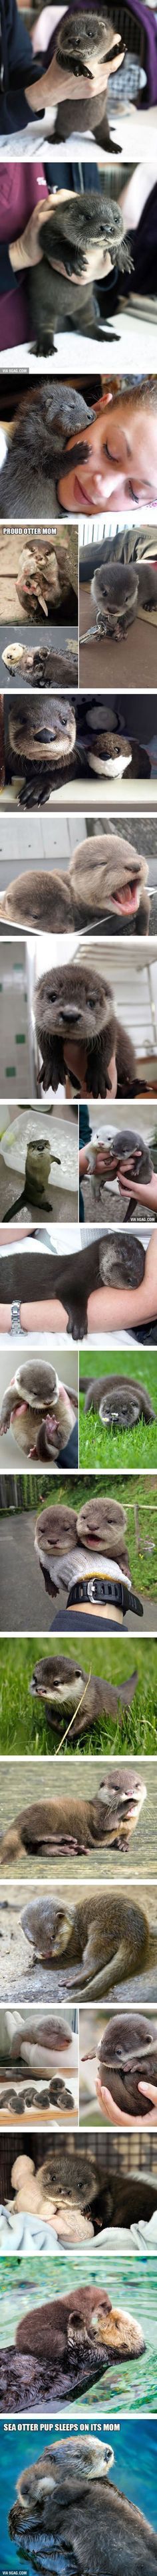 Cuteness overloaded: Baby Otters